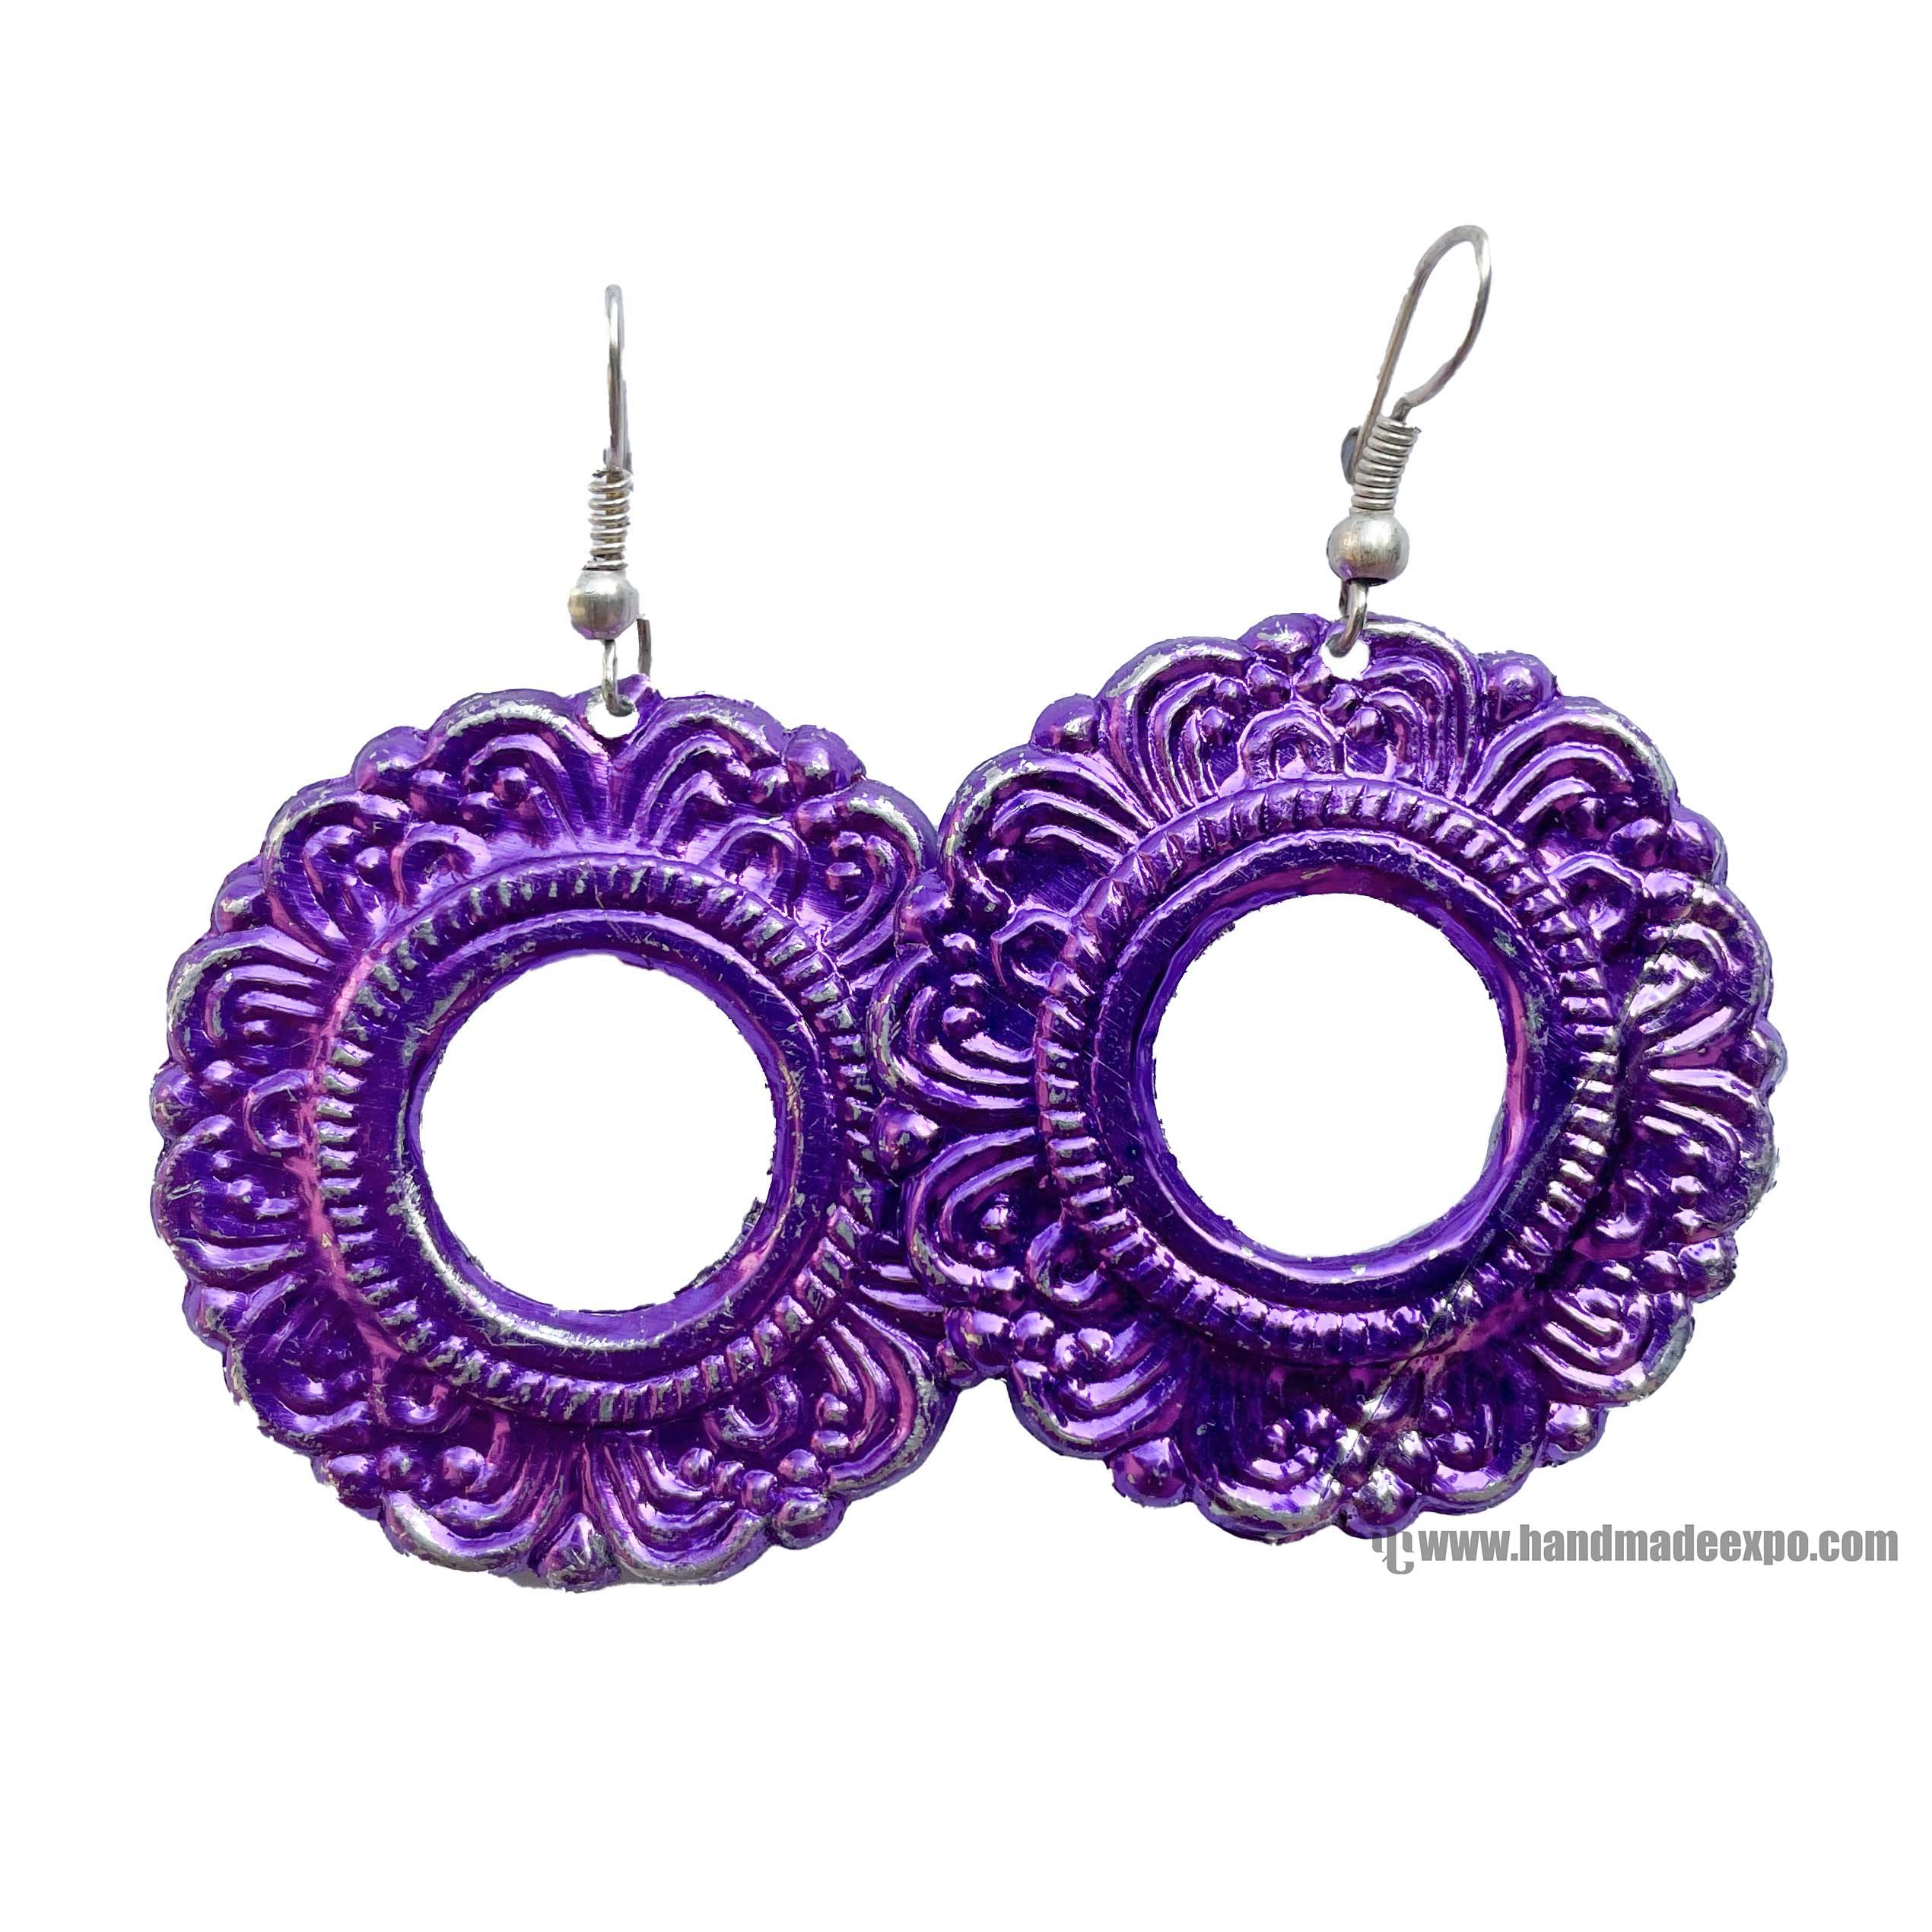 Metal Earring flower Design, With Whole Purple